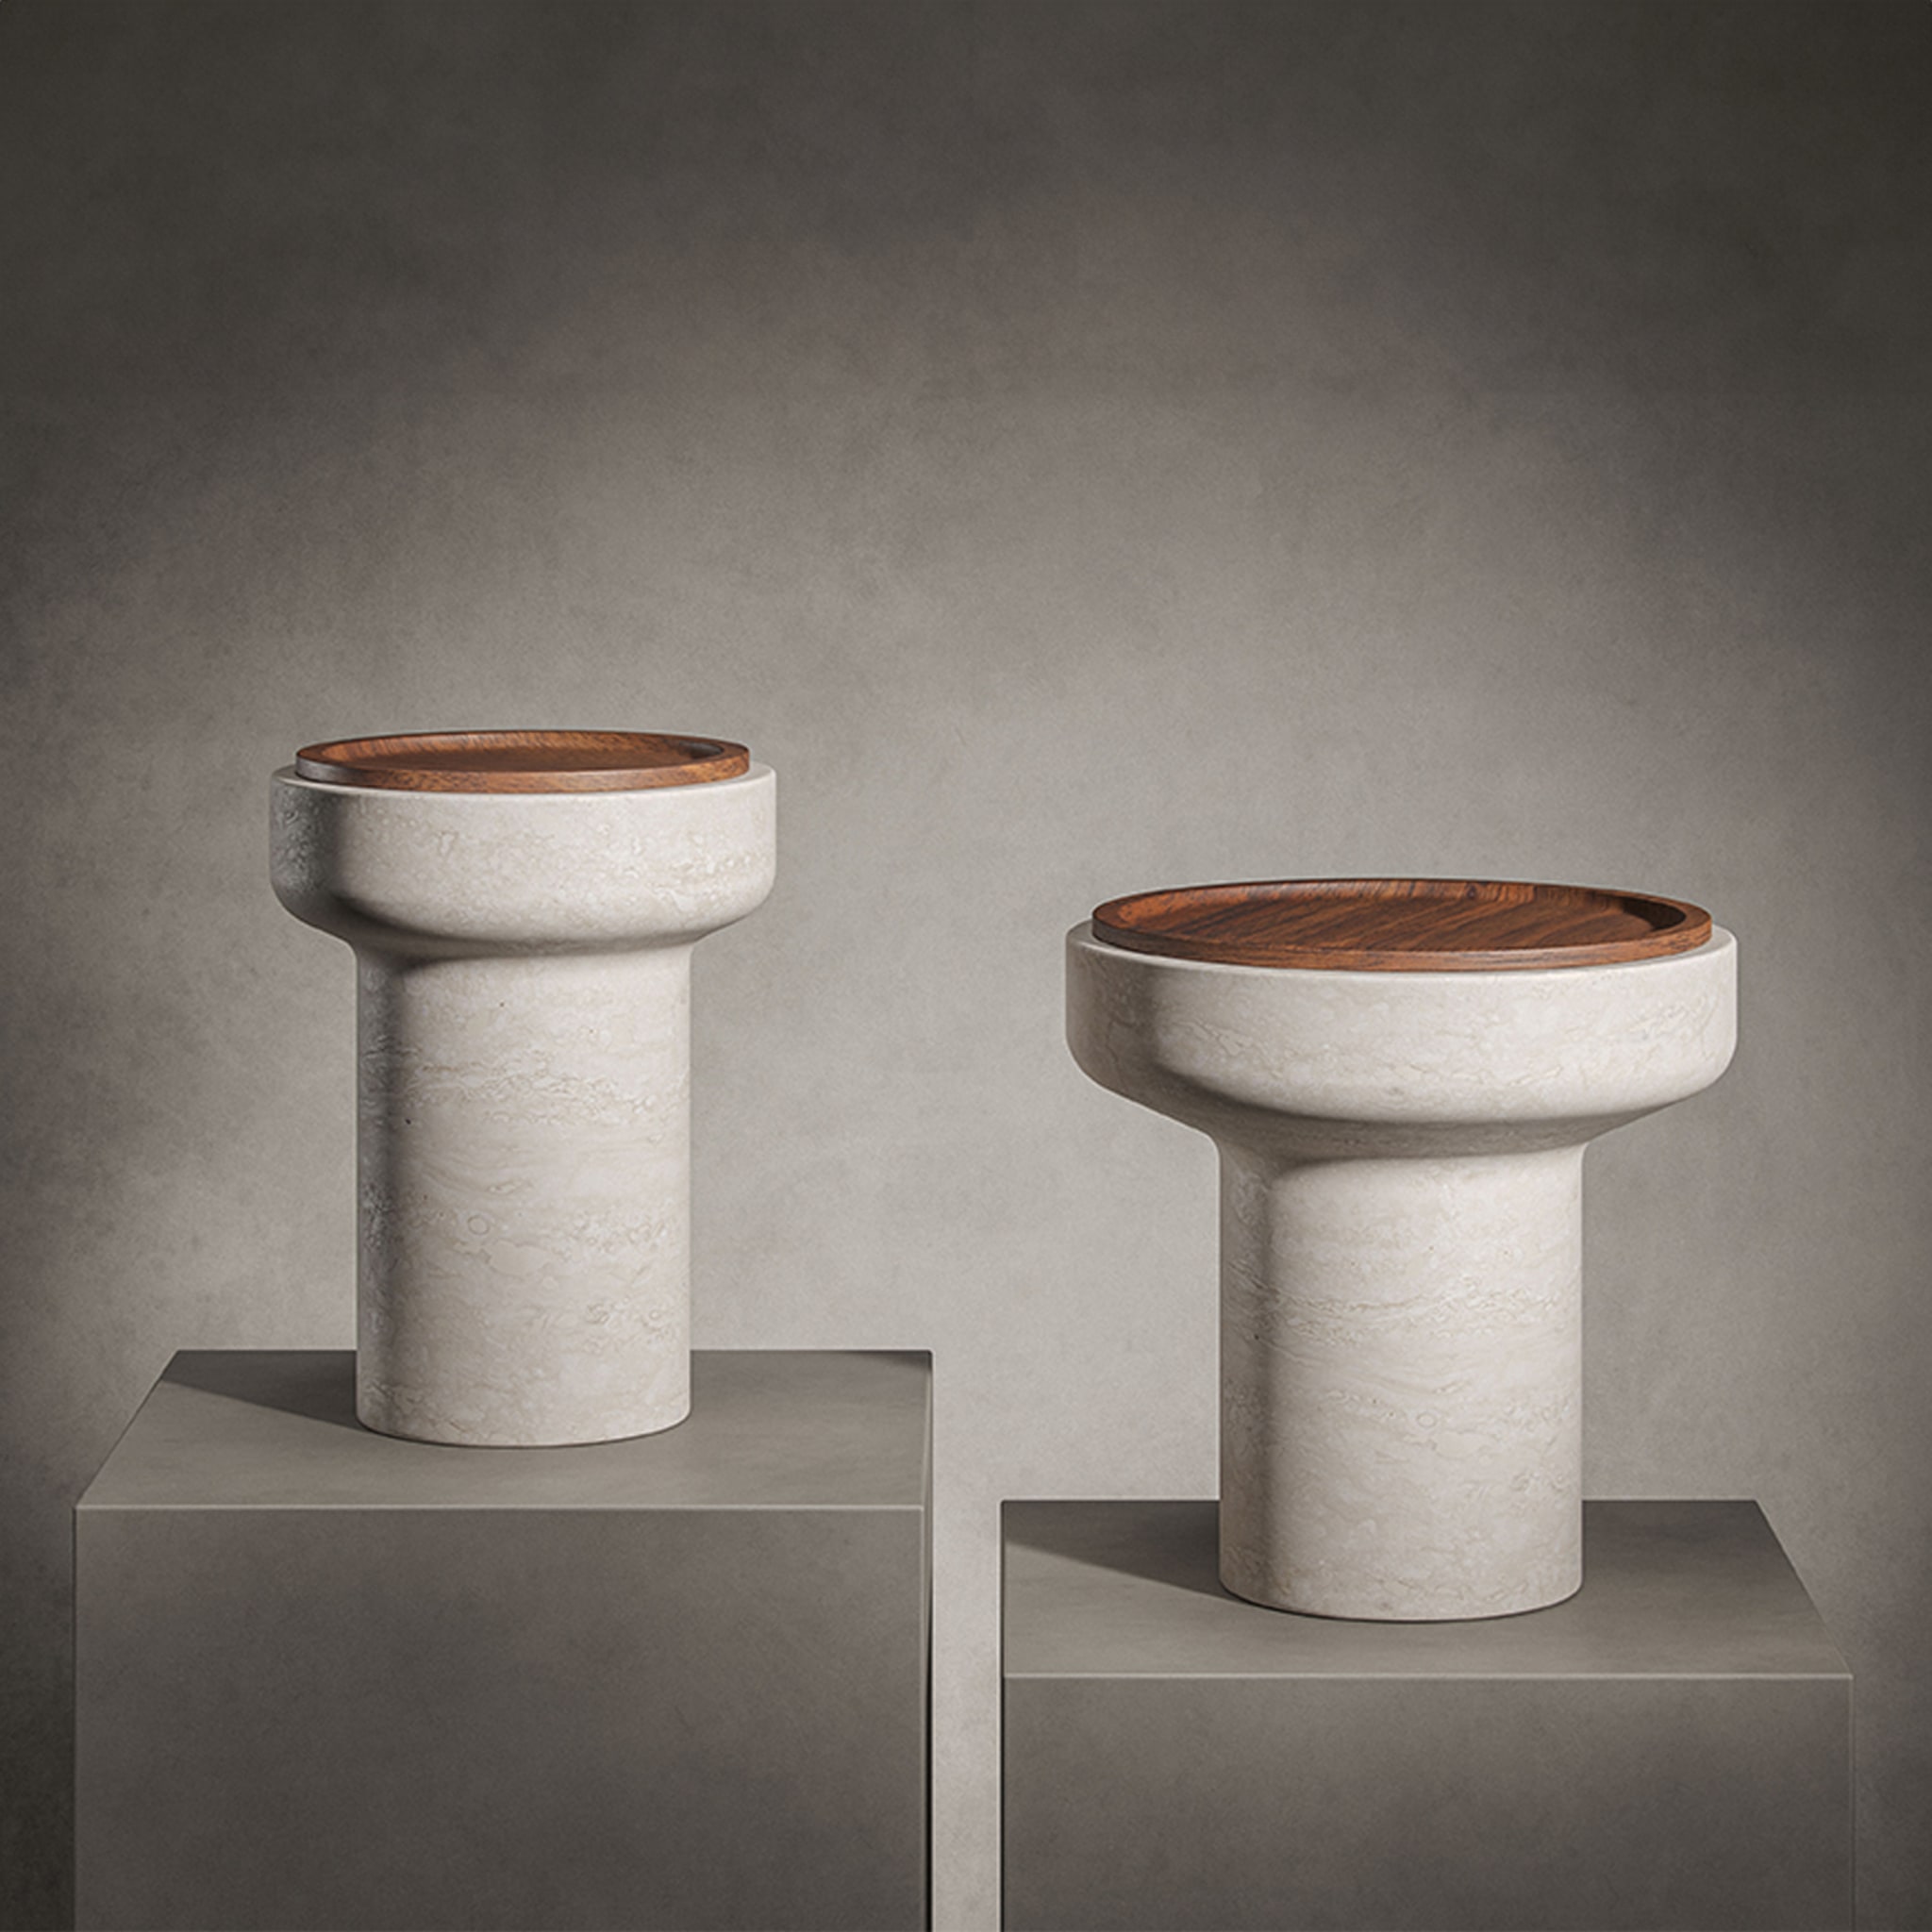 Tivoli Side Table in travertine and walnut by Ivan Colominas - Alternative view 2